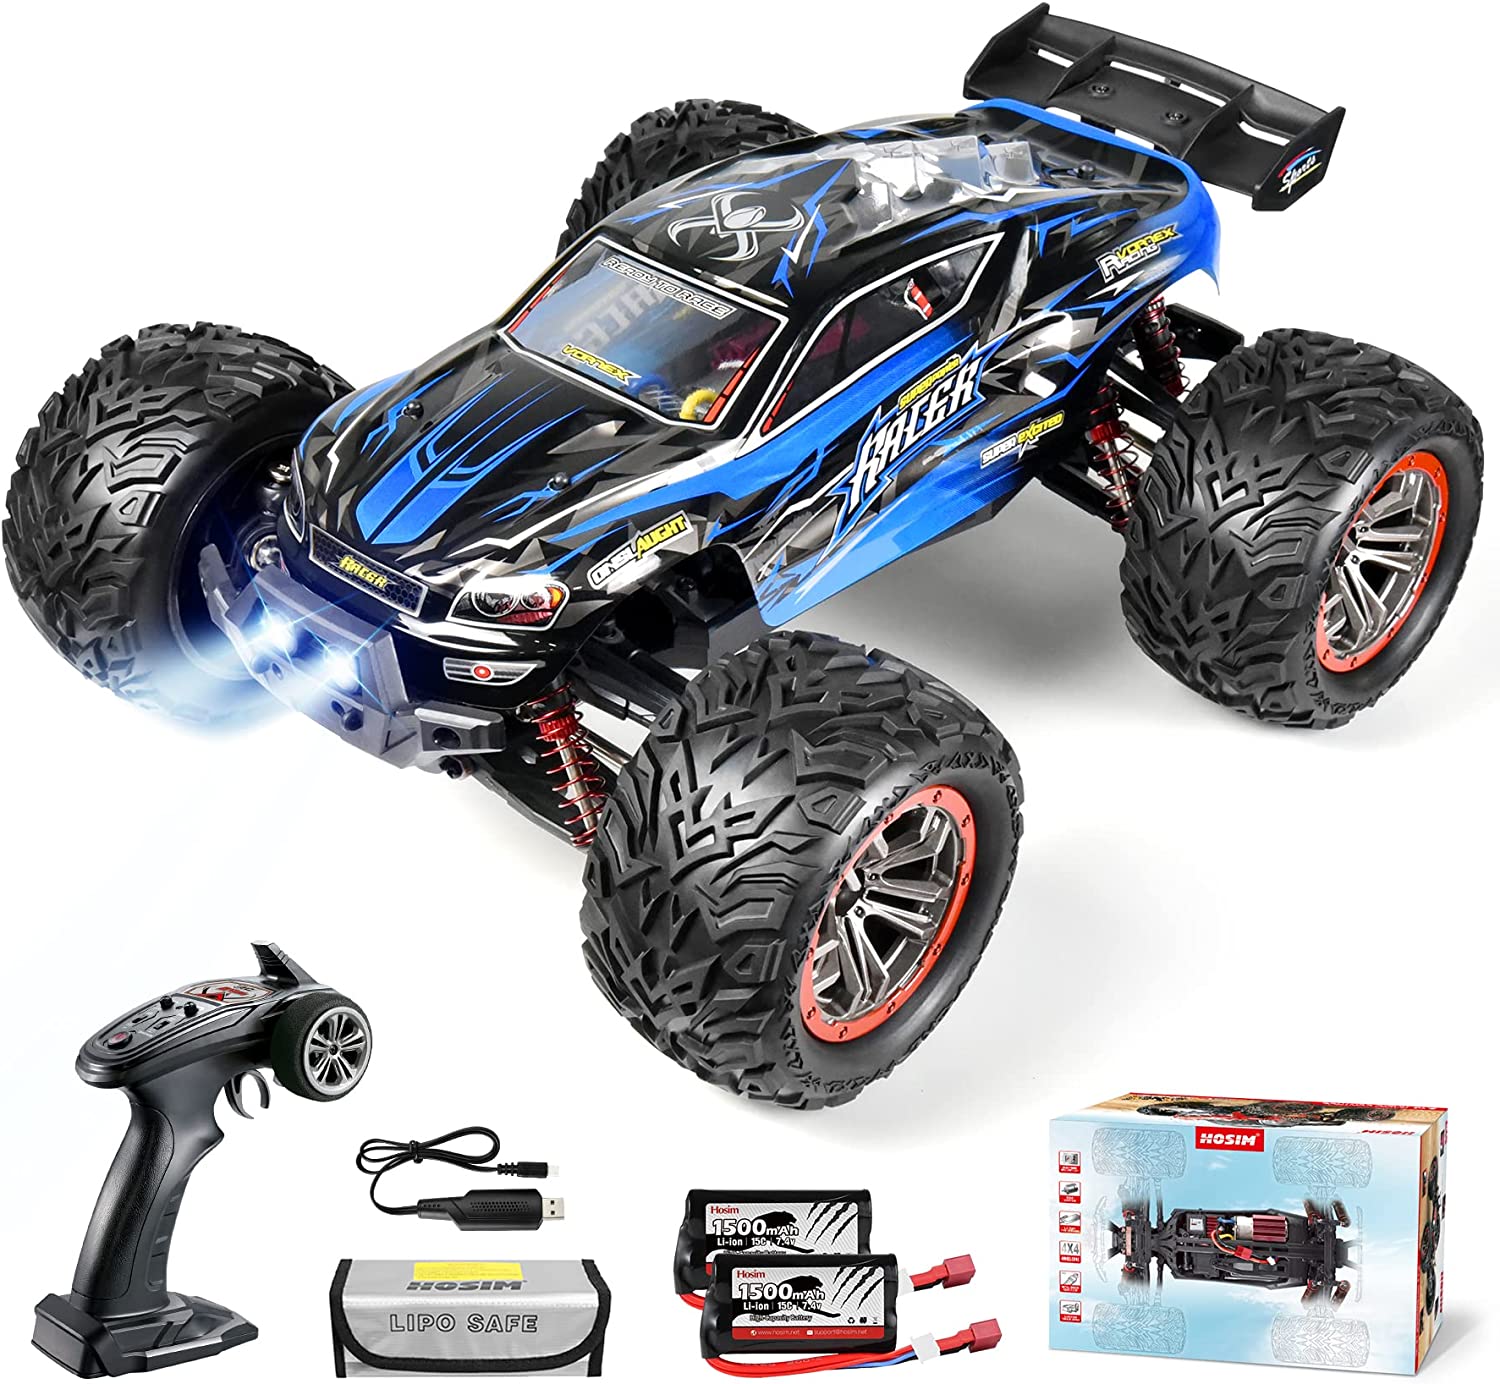 Hosim Large Size 1:12 Scale 46km+/H 4WD 2.4Ghz Monster Truck 9156 blue